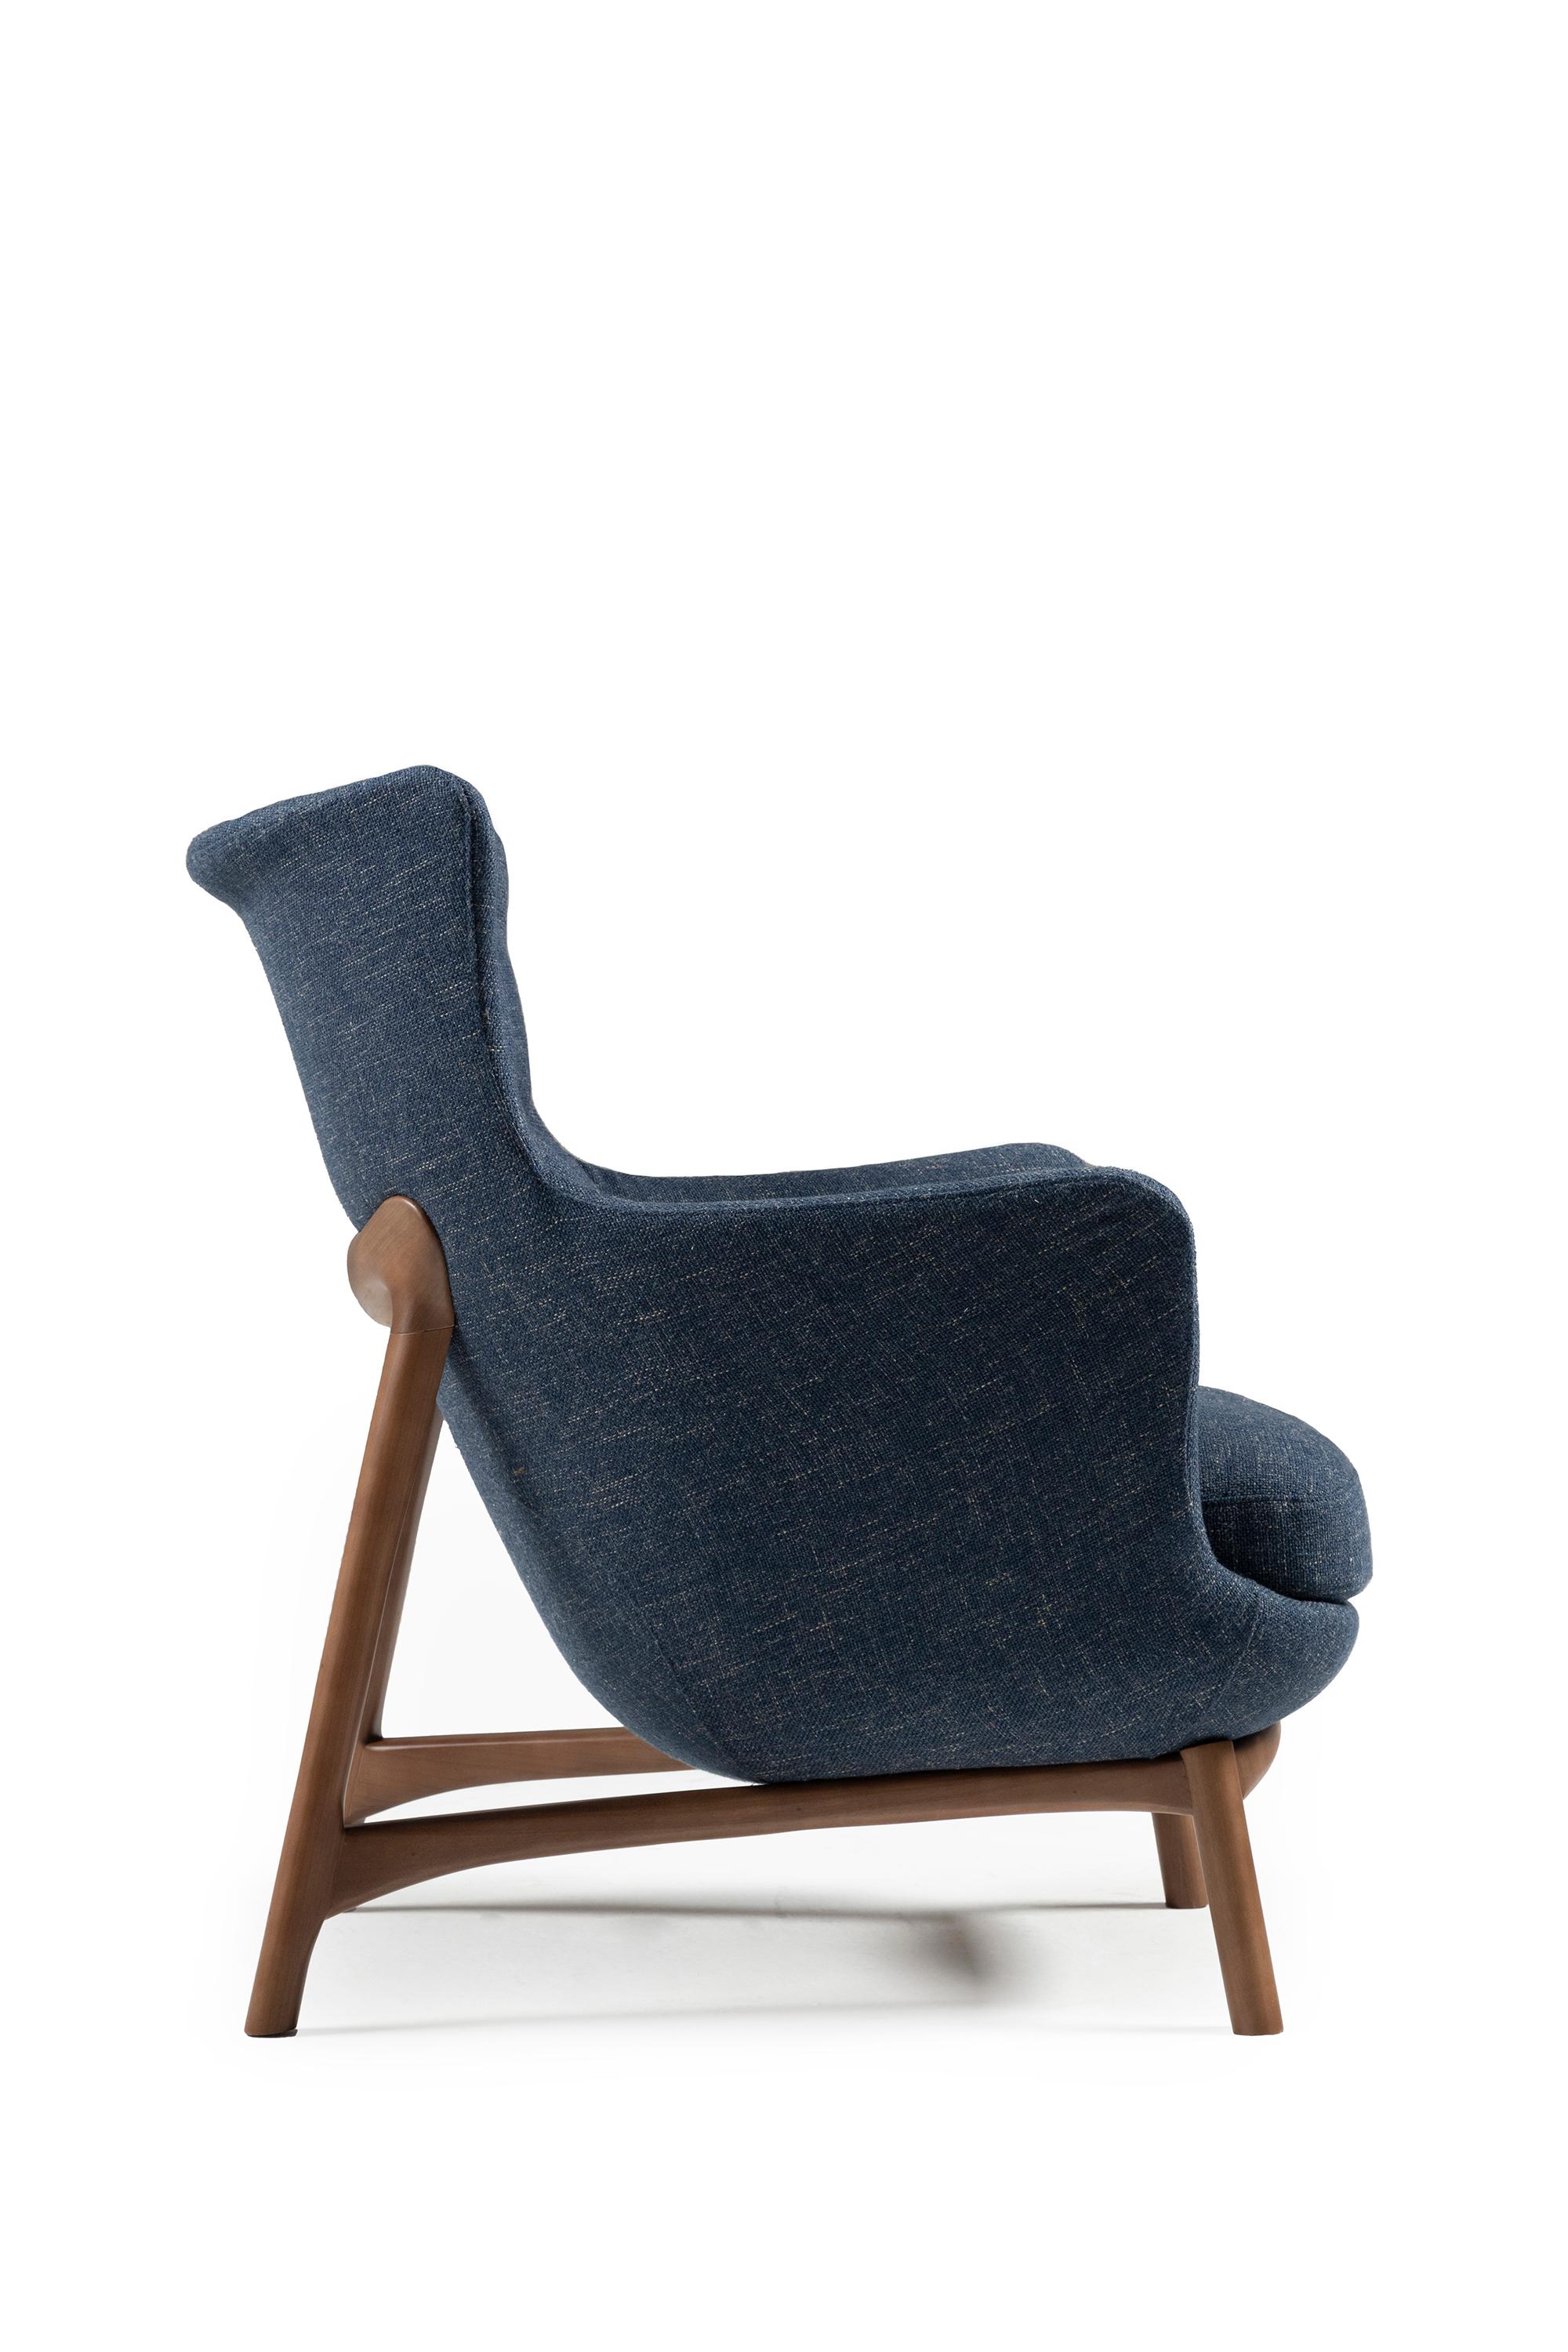 Brazilian Sublime Armchairs, Contemporary Style in Solid Wood, Textiles Upholstery.  For Sale